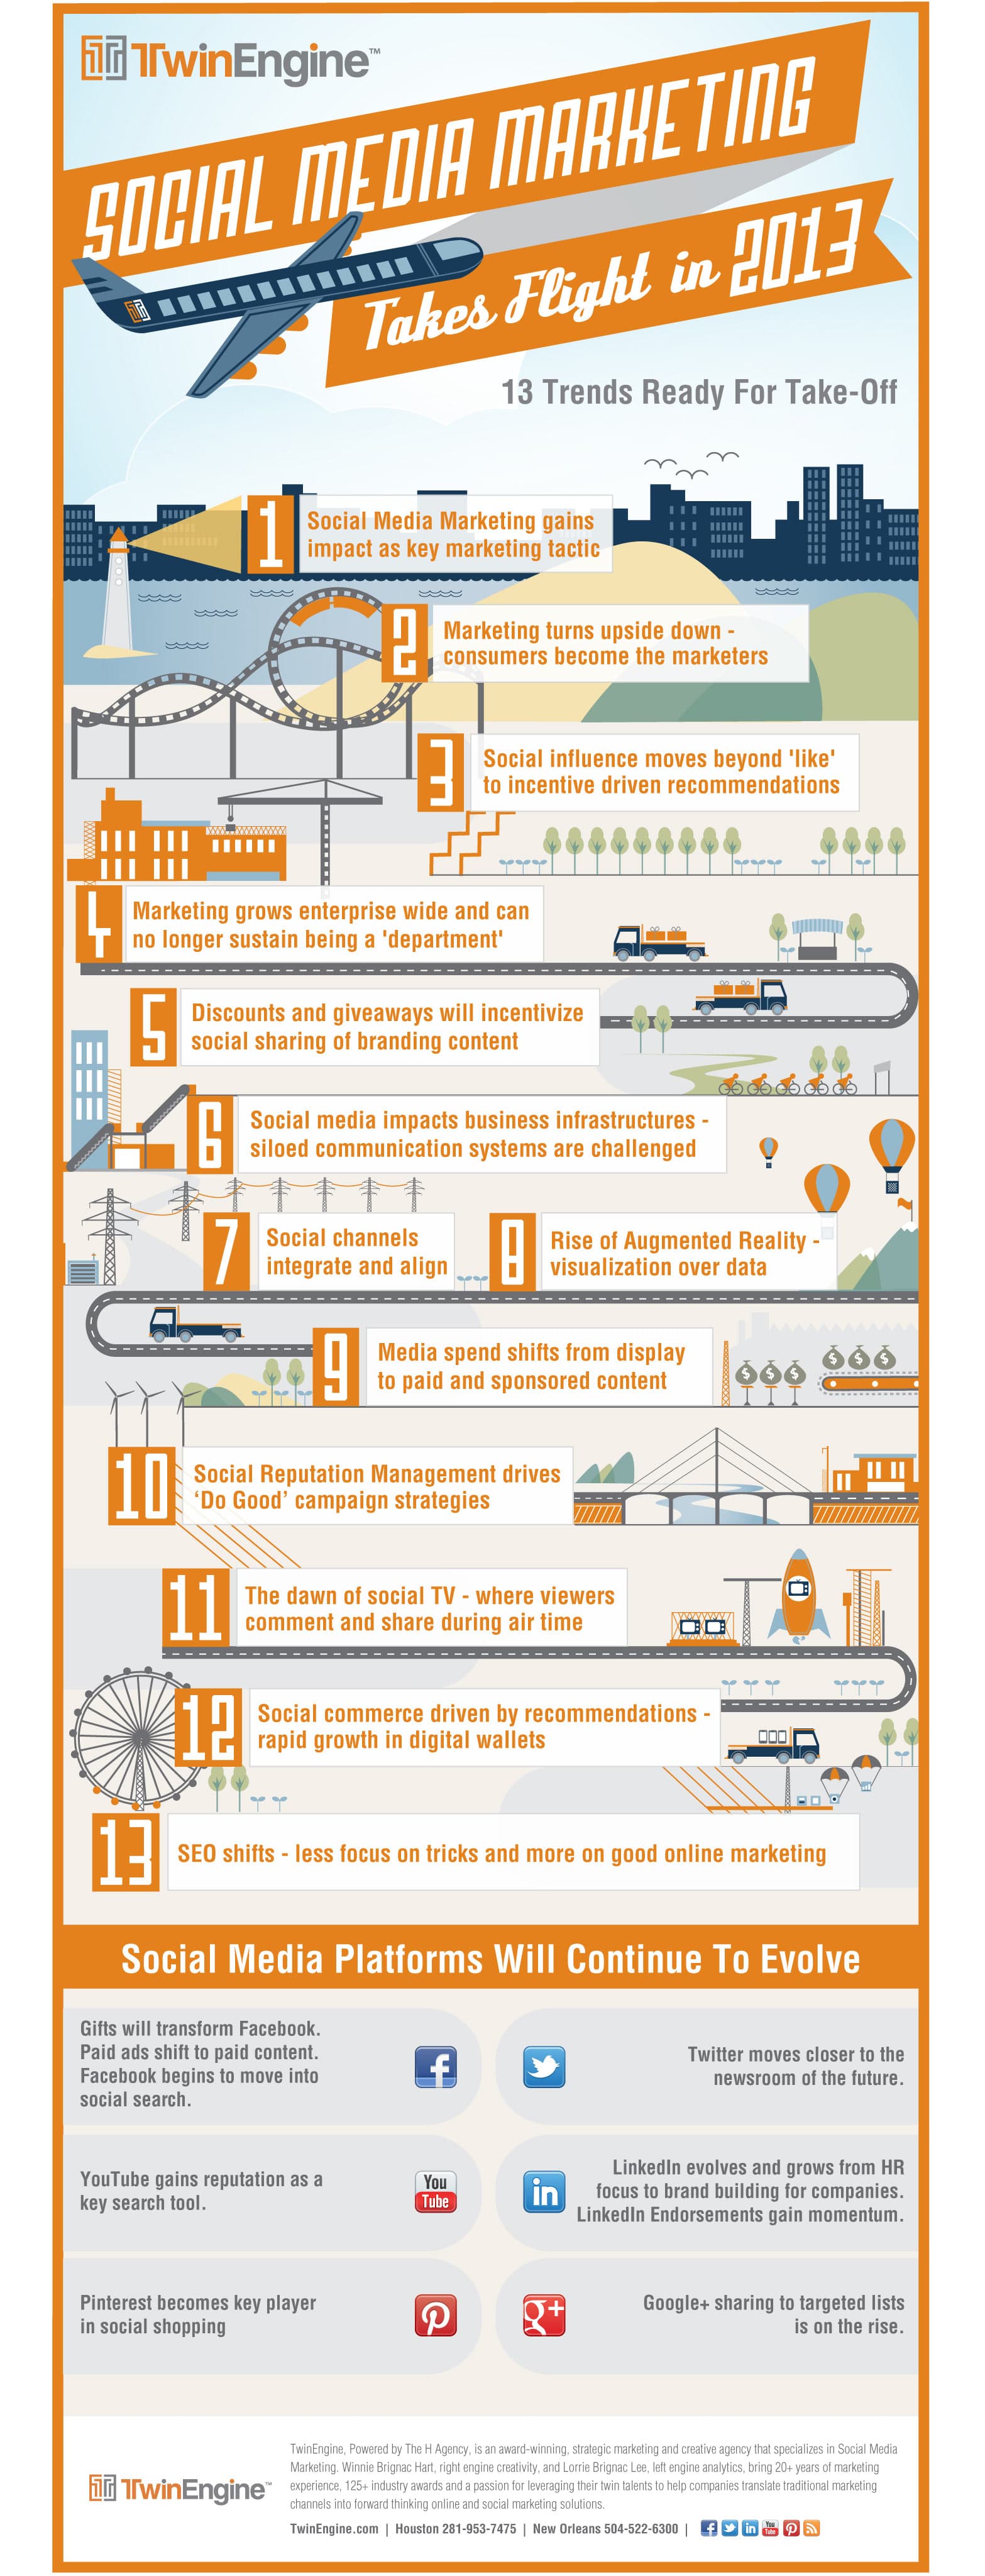 Internet Marketing Trends Ready To Take Off In 2013 [Infographic]